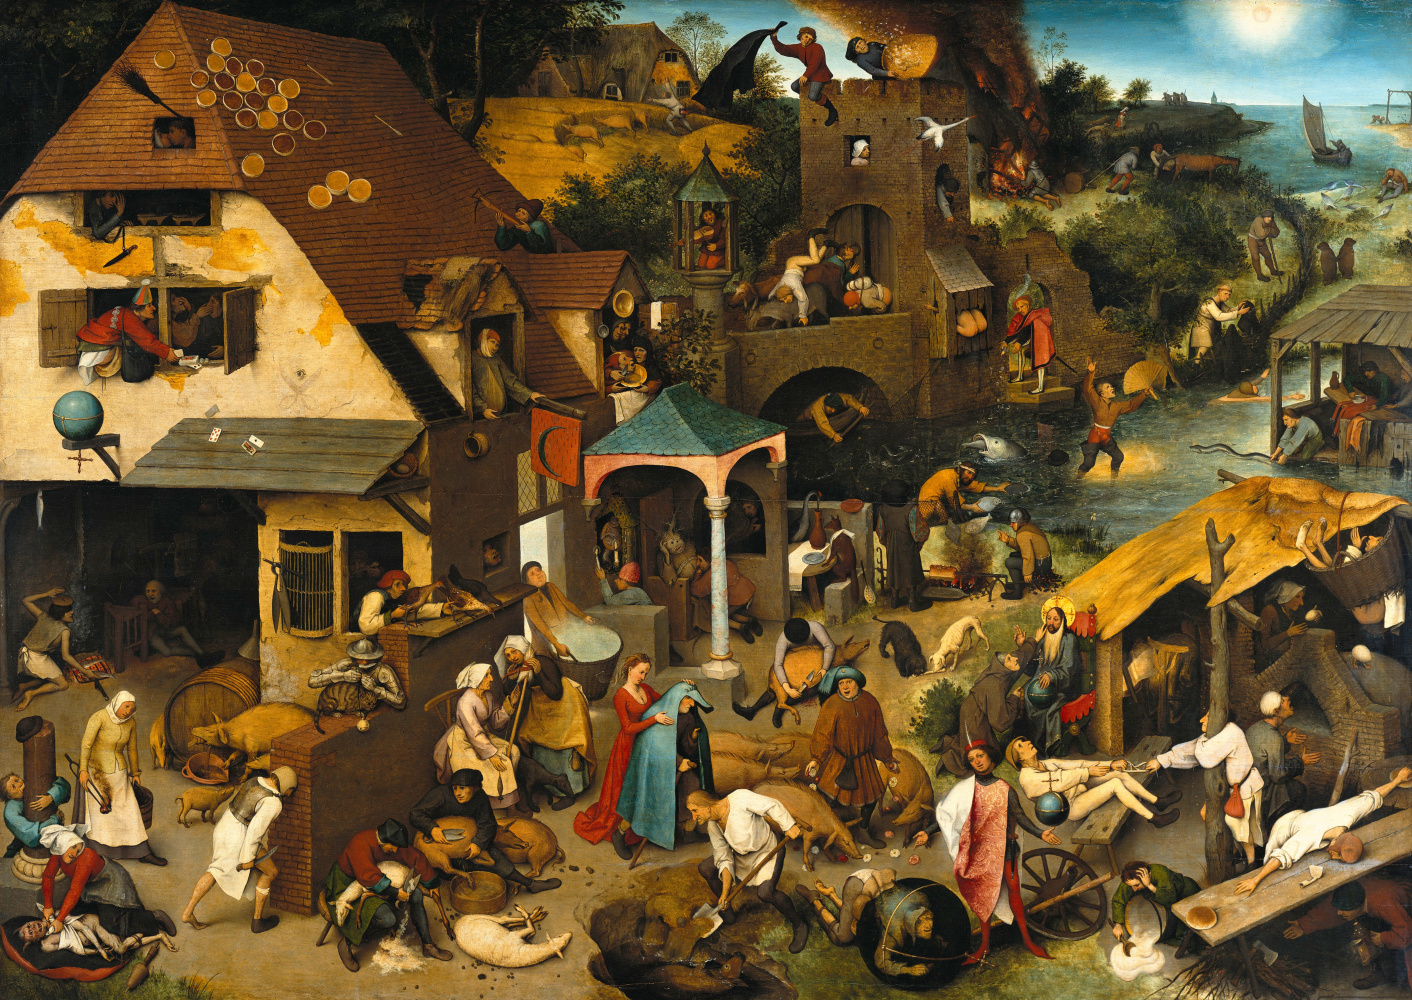 Brueghel’s “Flemish Proverbs” with explanation: the topsy turvy world